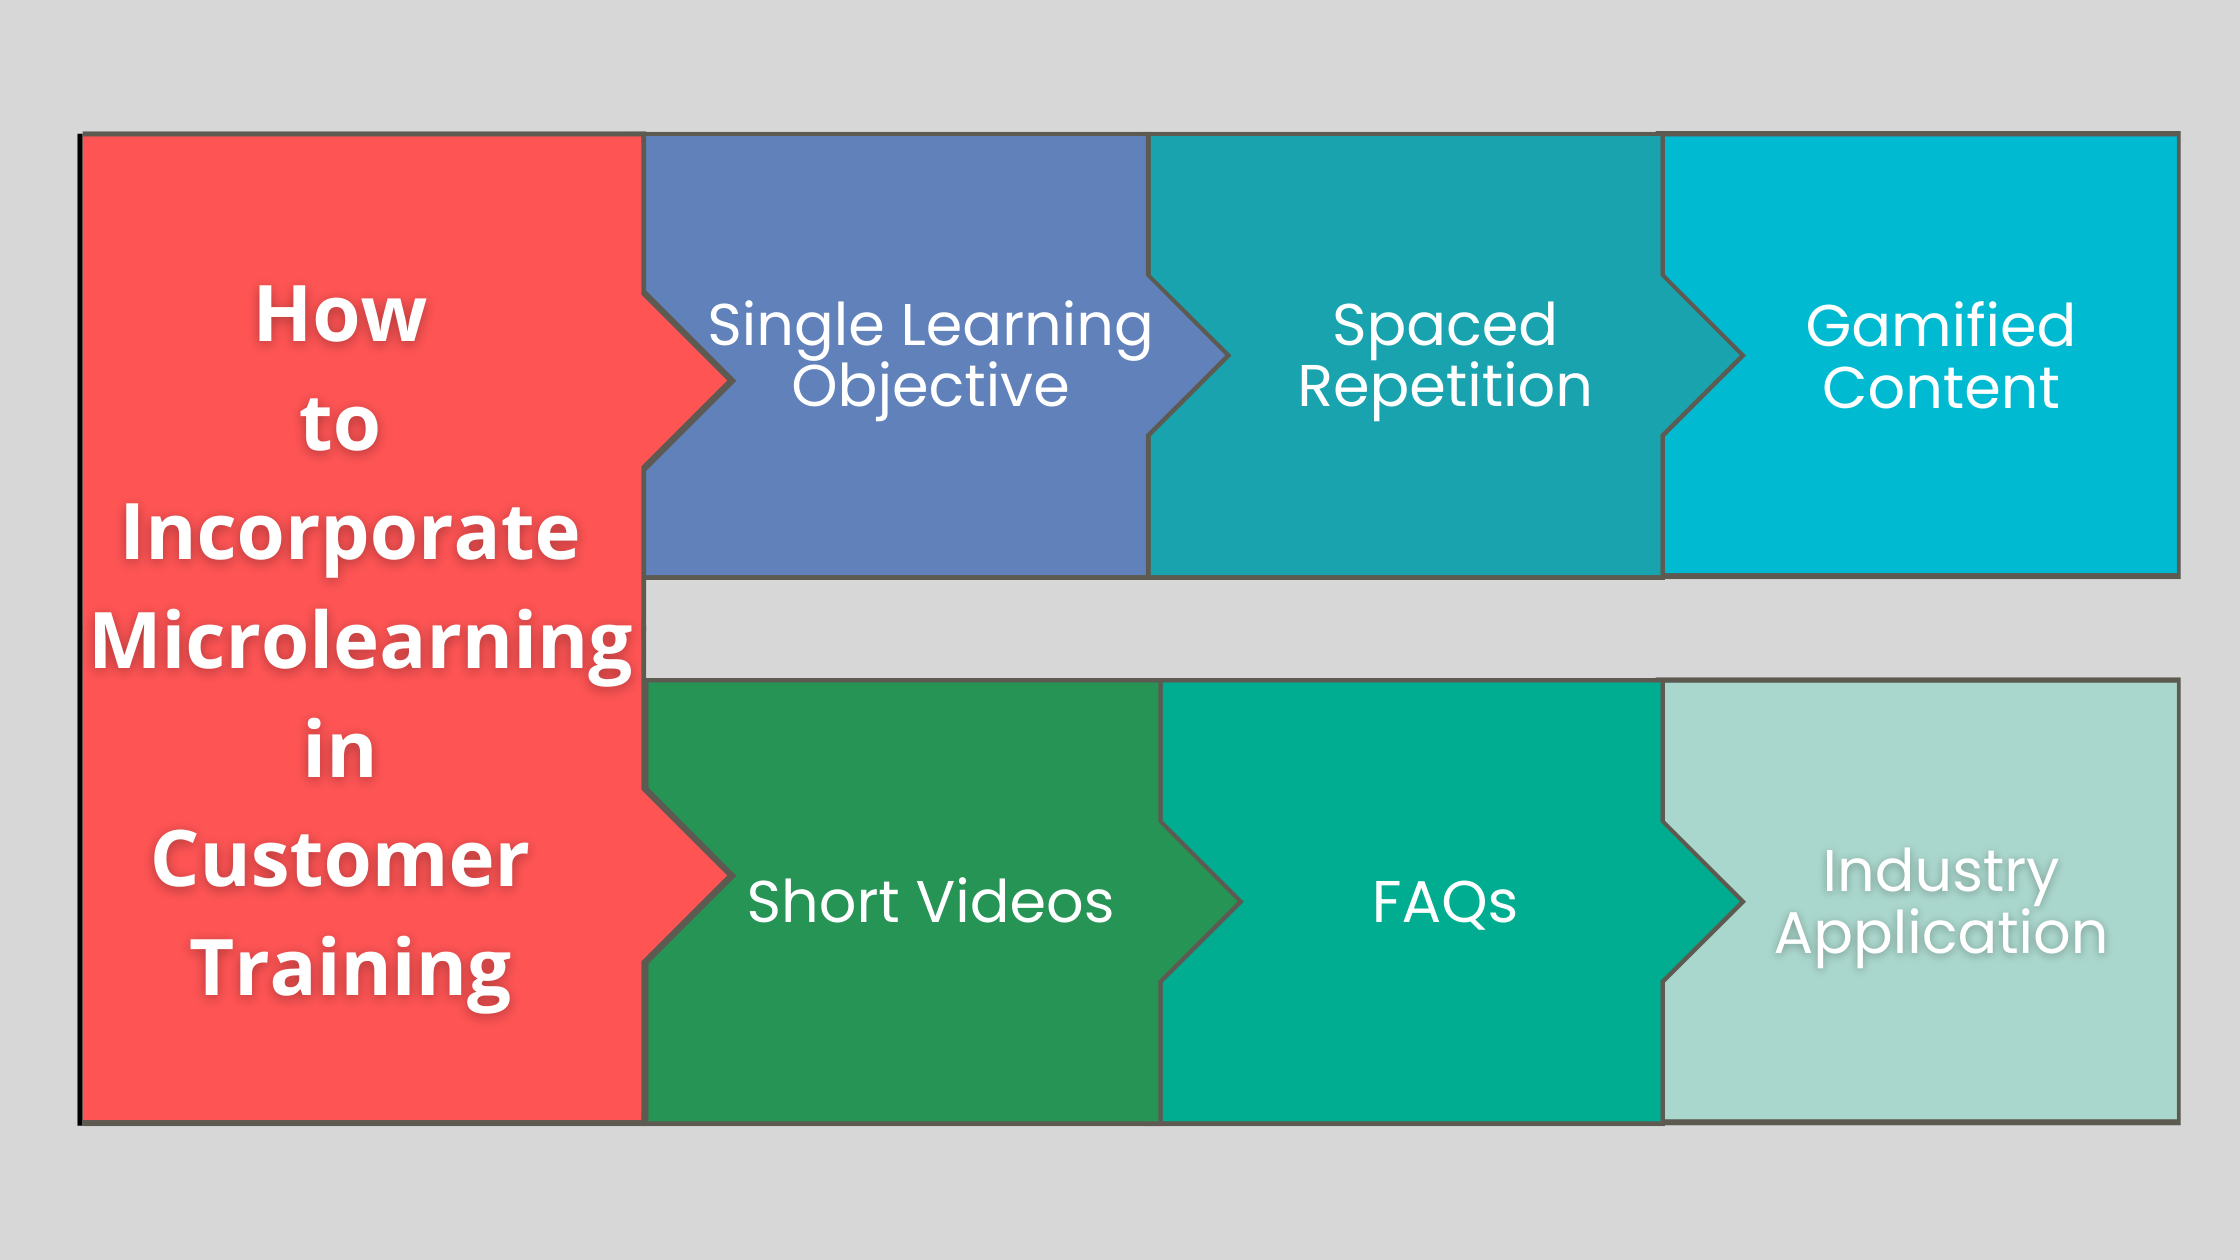 How to Incorporate Microlearning in Customer Training